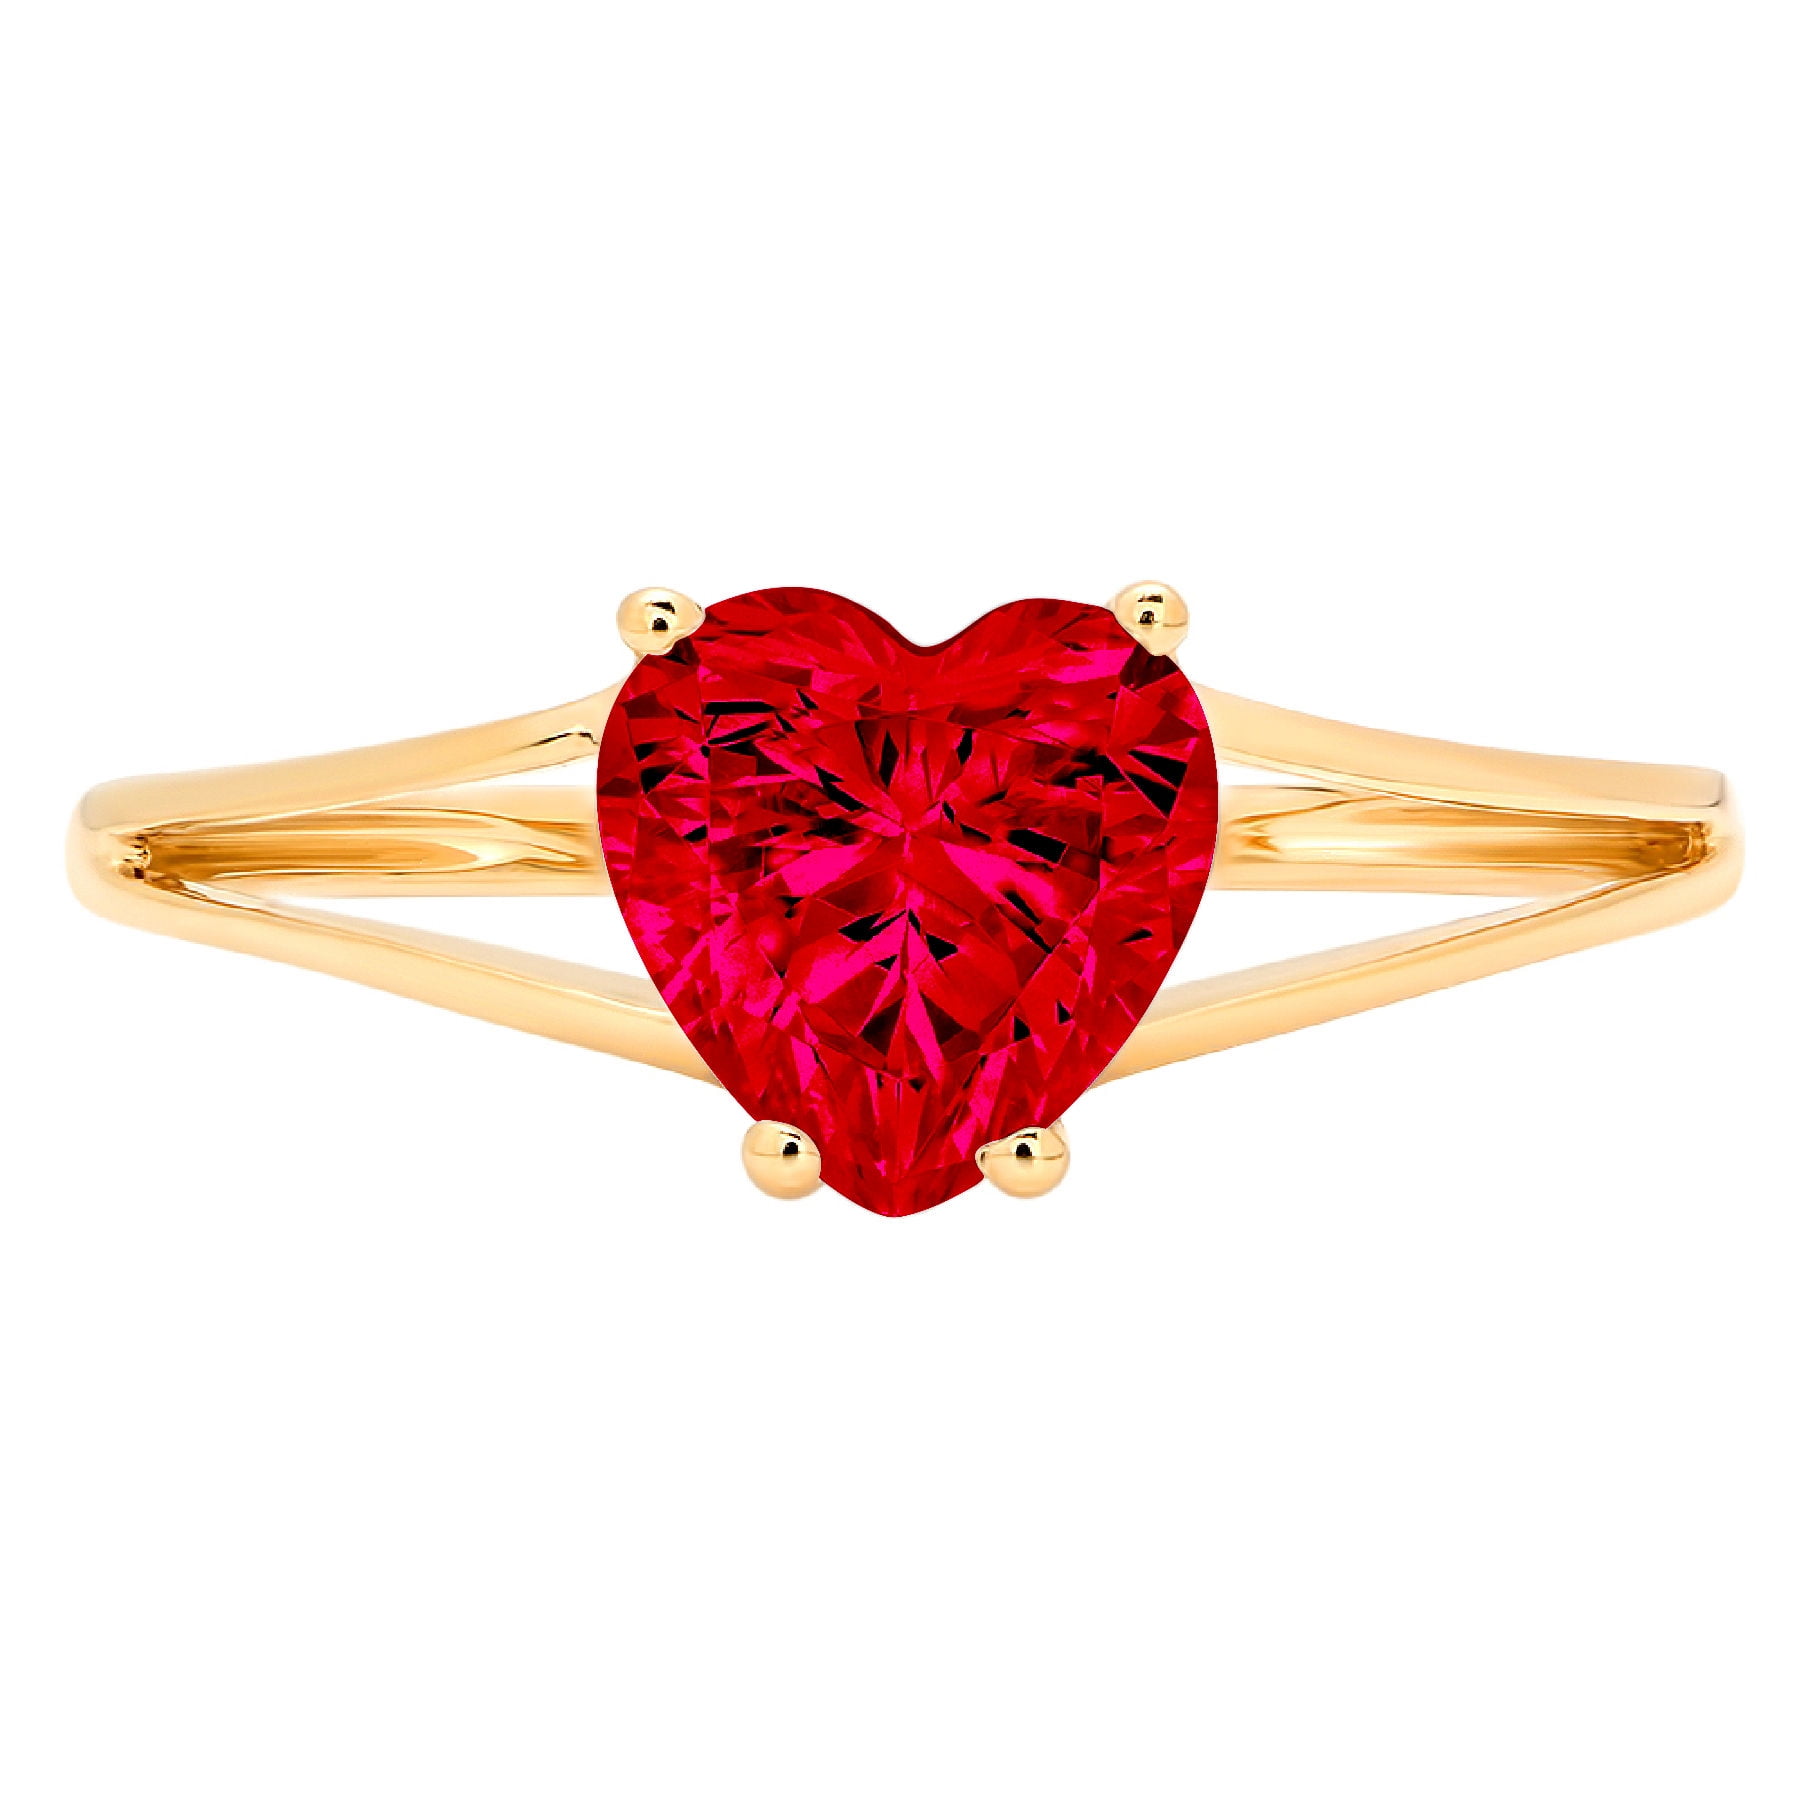 1.06 ct Brilliant Heart Cut VVS1 Simulated Ruby Rose Solid 14k or 18k Gold Robotic Laser Engraved Handmade Solitaire Claddagh Ring